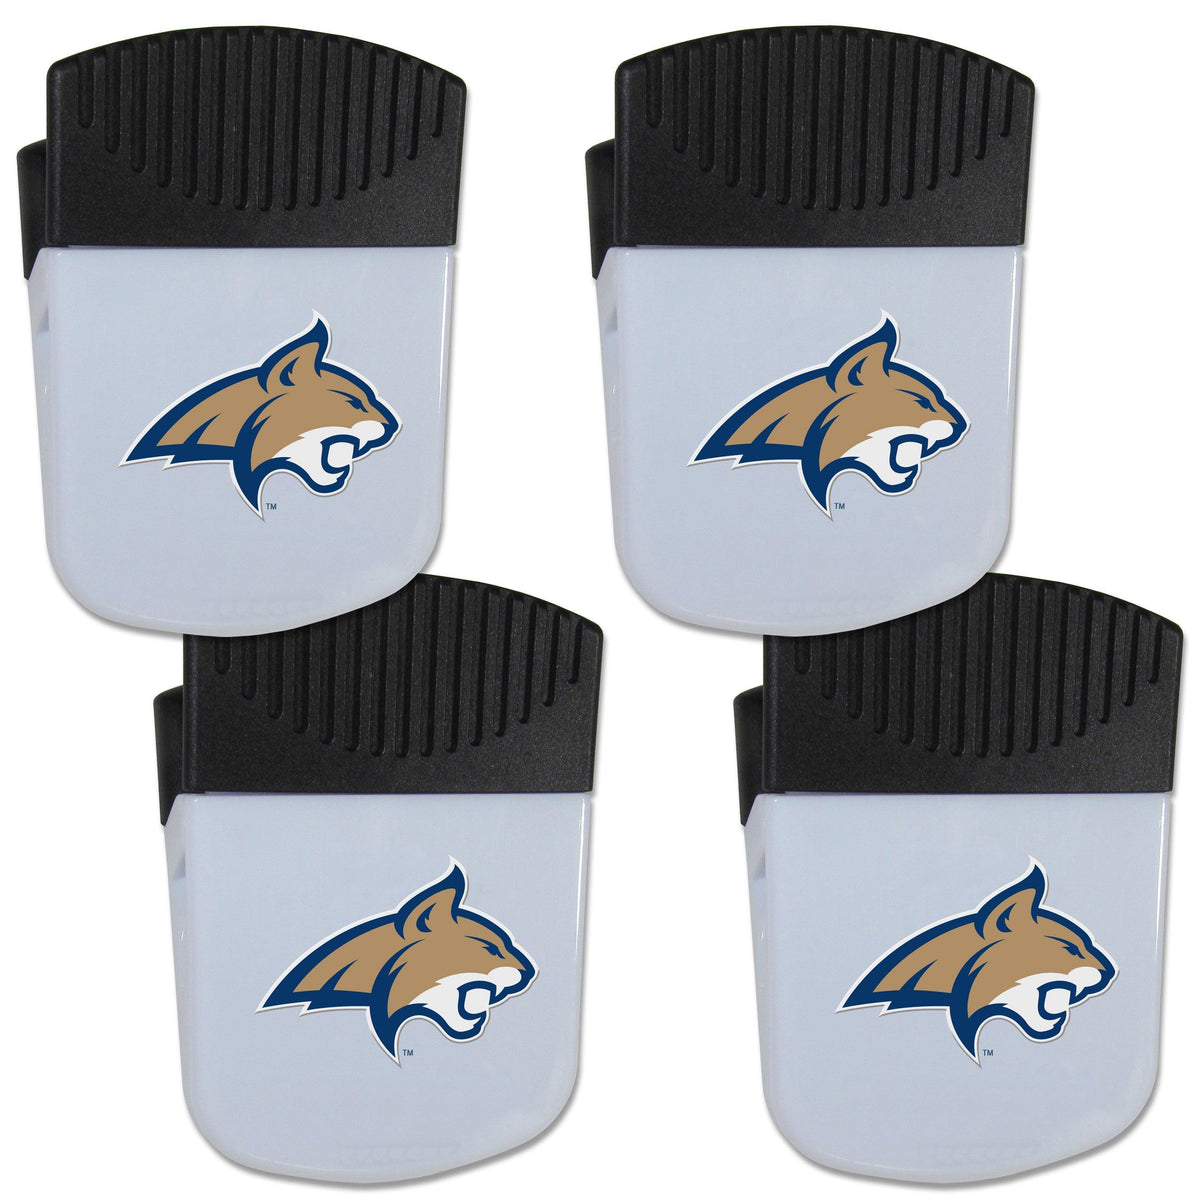 Montana St. Bobcats Chip Clip Magnet with Bottle Opener, 4 pack - Flyclothing LLC